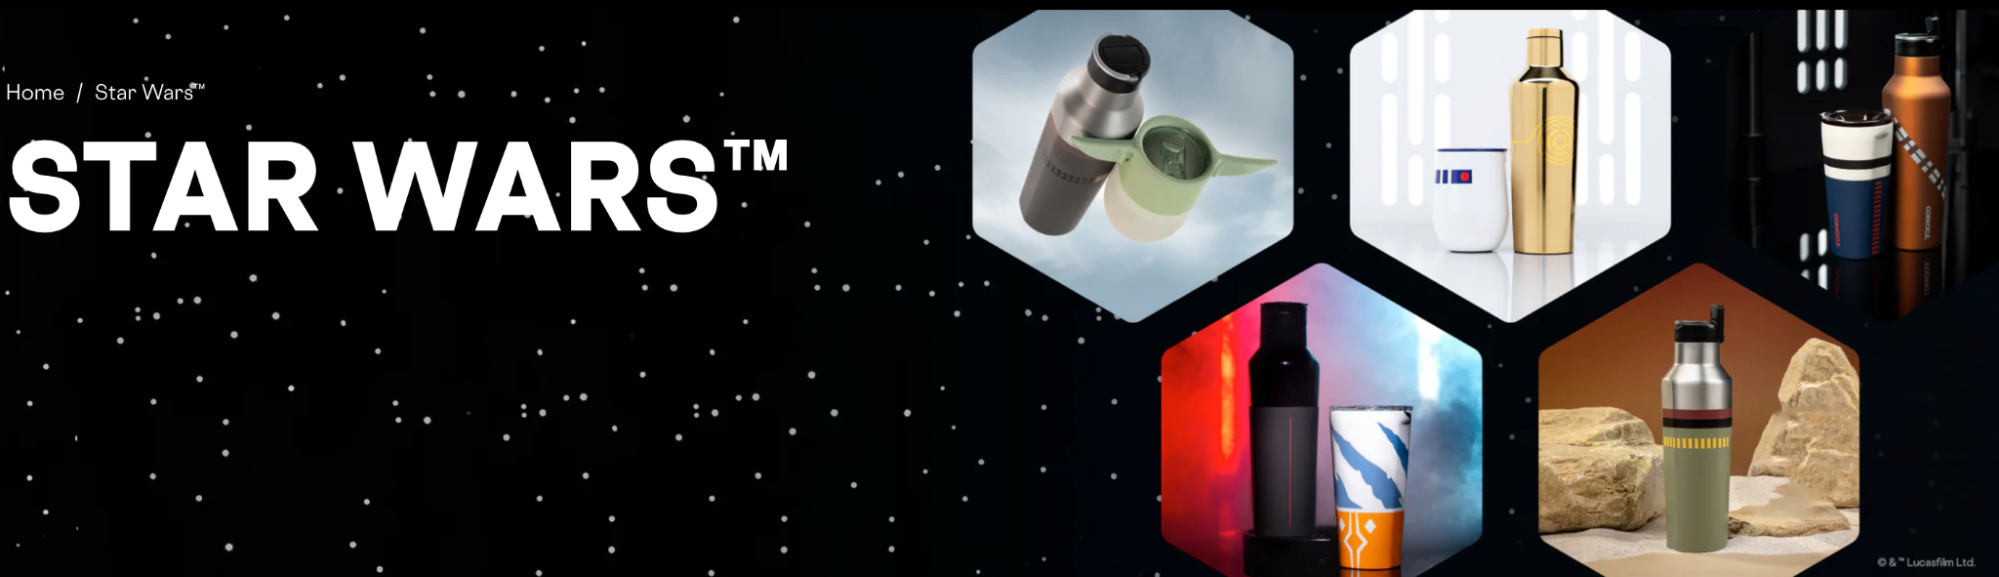 Star Wars-themed thermos flask on a night sky background